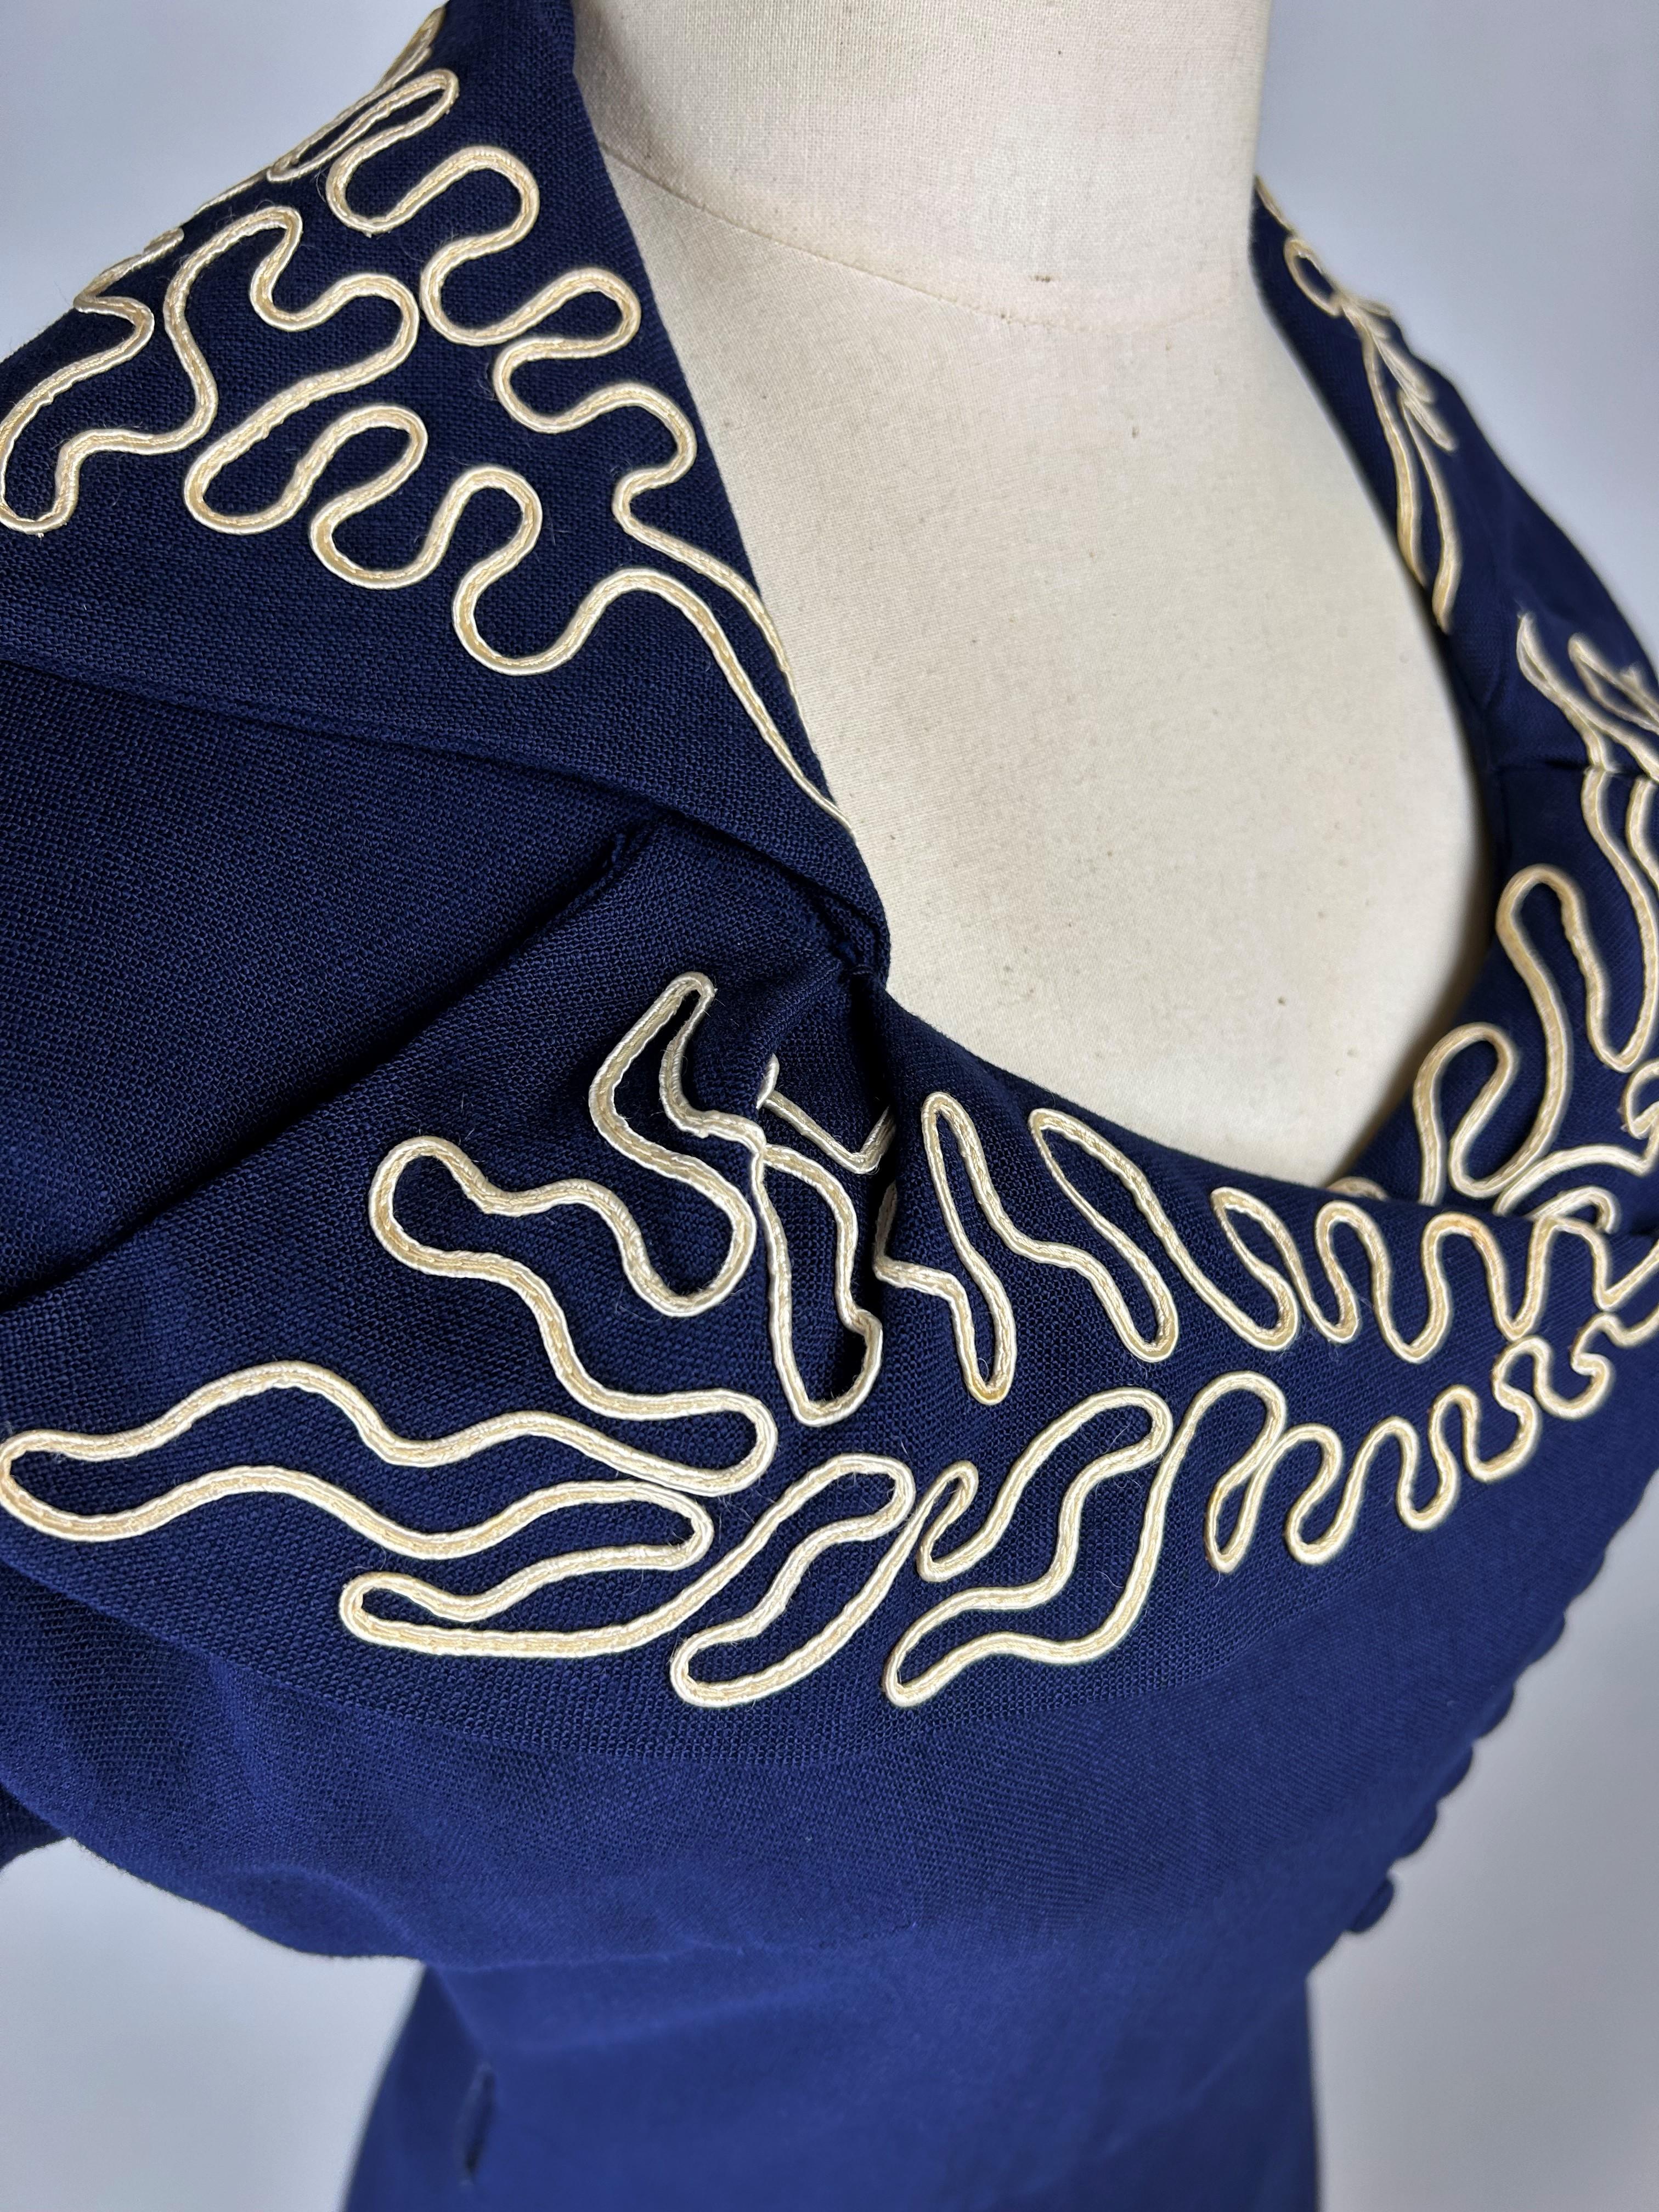 A Navy French Day Dress with white piping appliqué Circa 1945-1950 For Sale 12